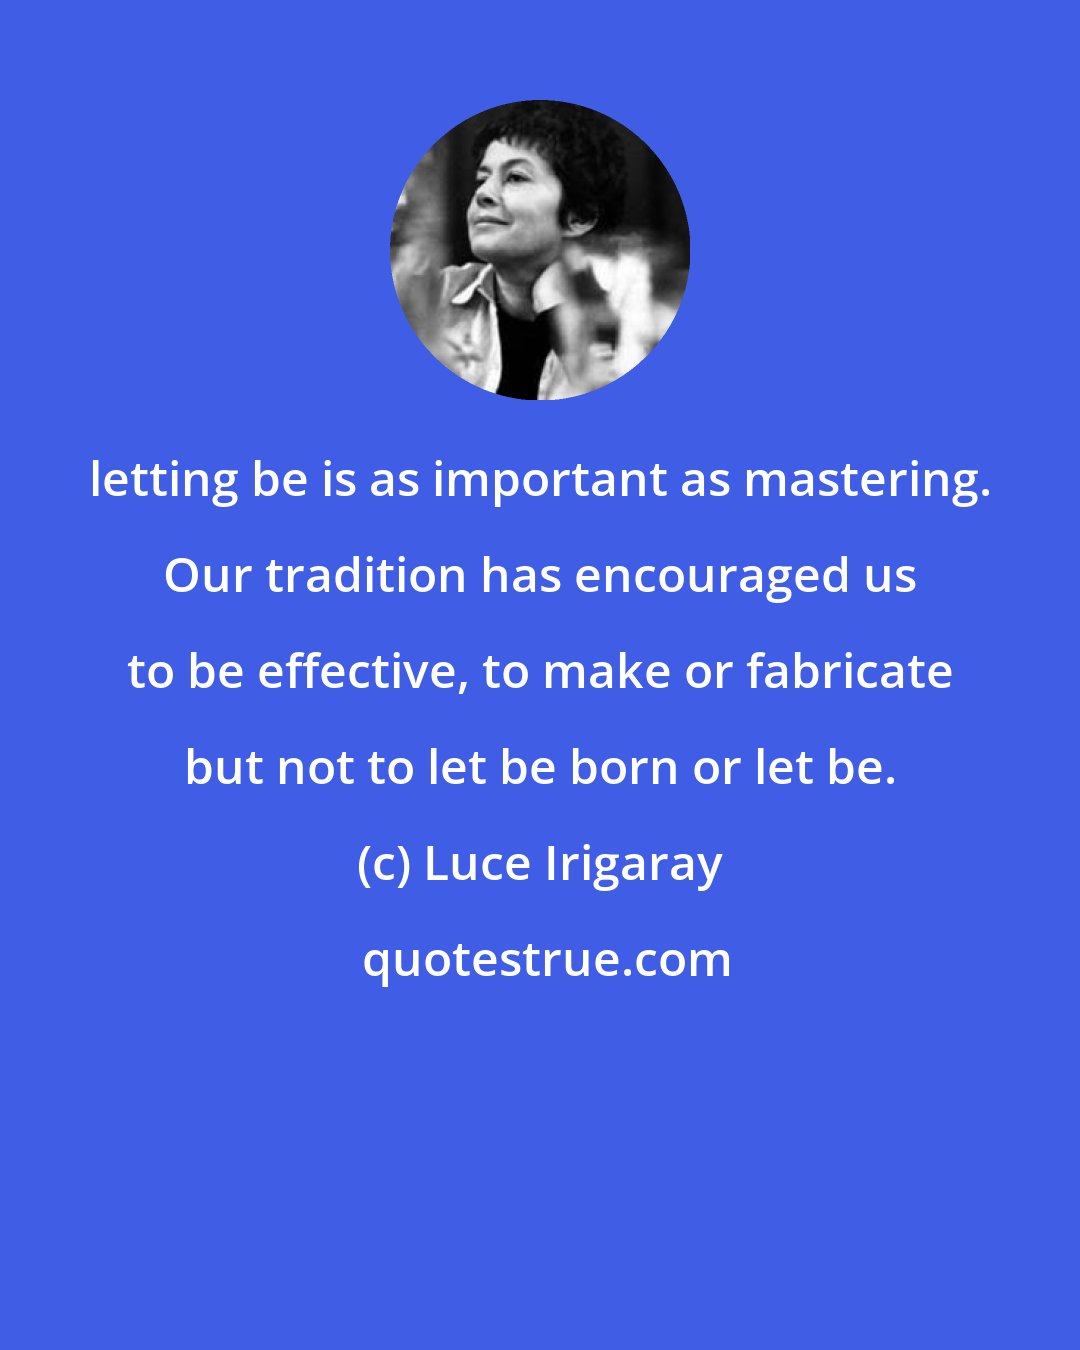 Luce Irigaray: letting be is as important as mastering. Our tradition has encouraged us to be effective, to make or fabricate but not to let be born or let be.